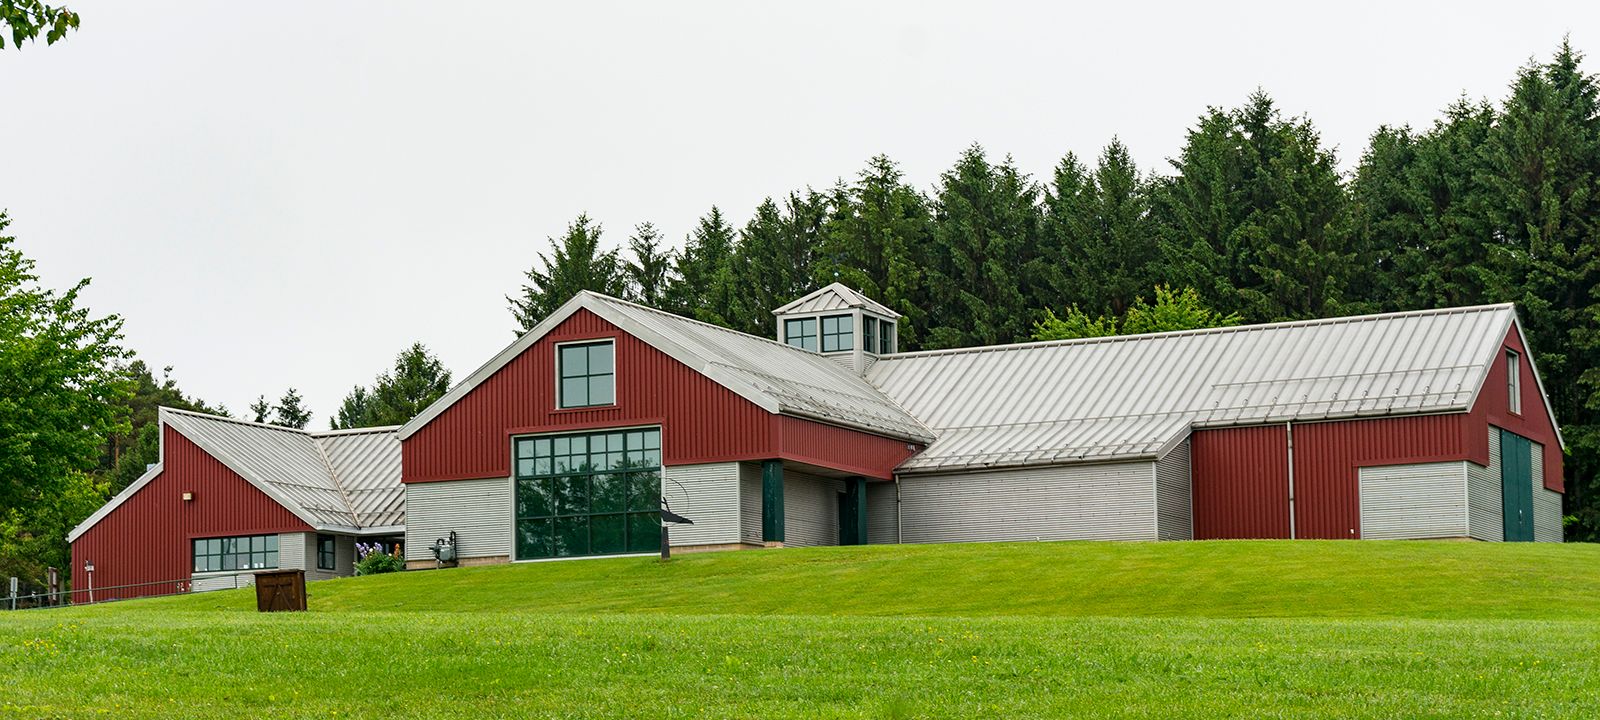 Photograph of a large building with red and metal roof and siding above a grassy hill.